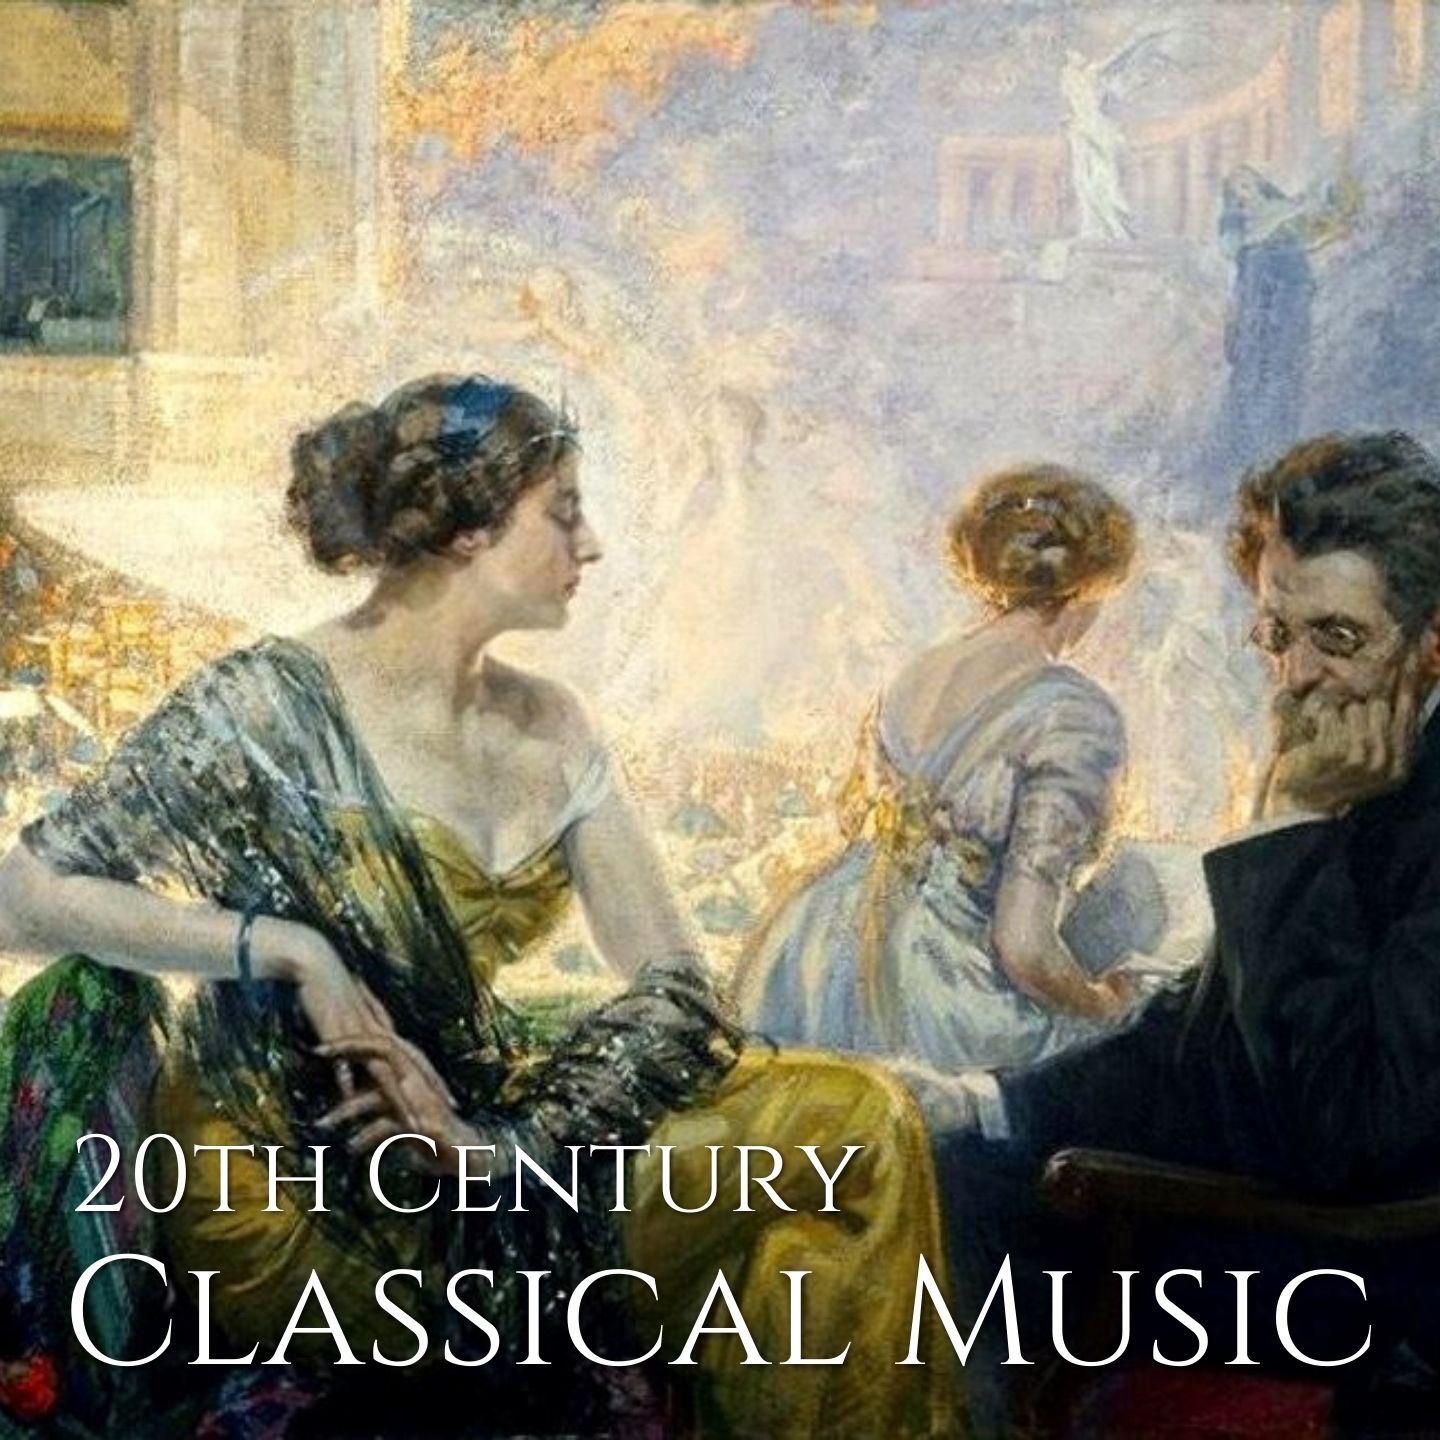 Classical Music from the 20th Century